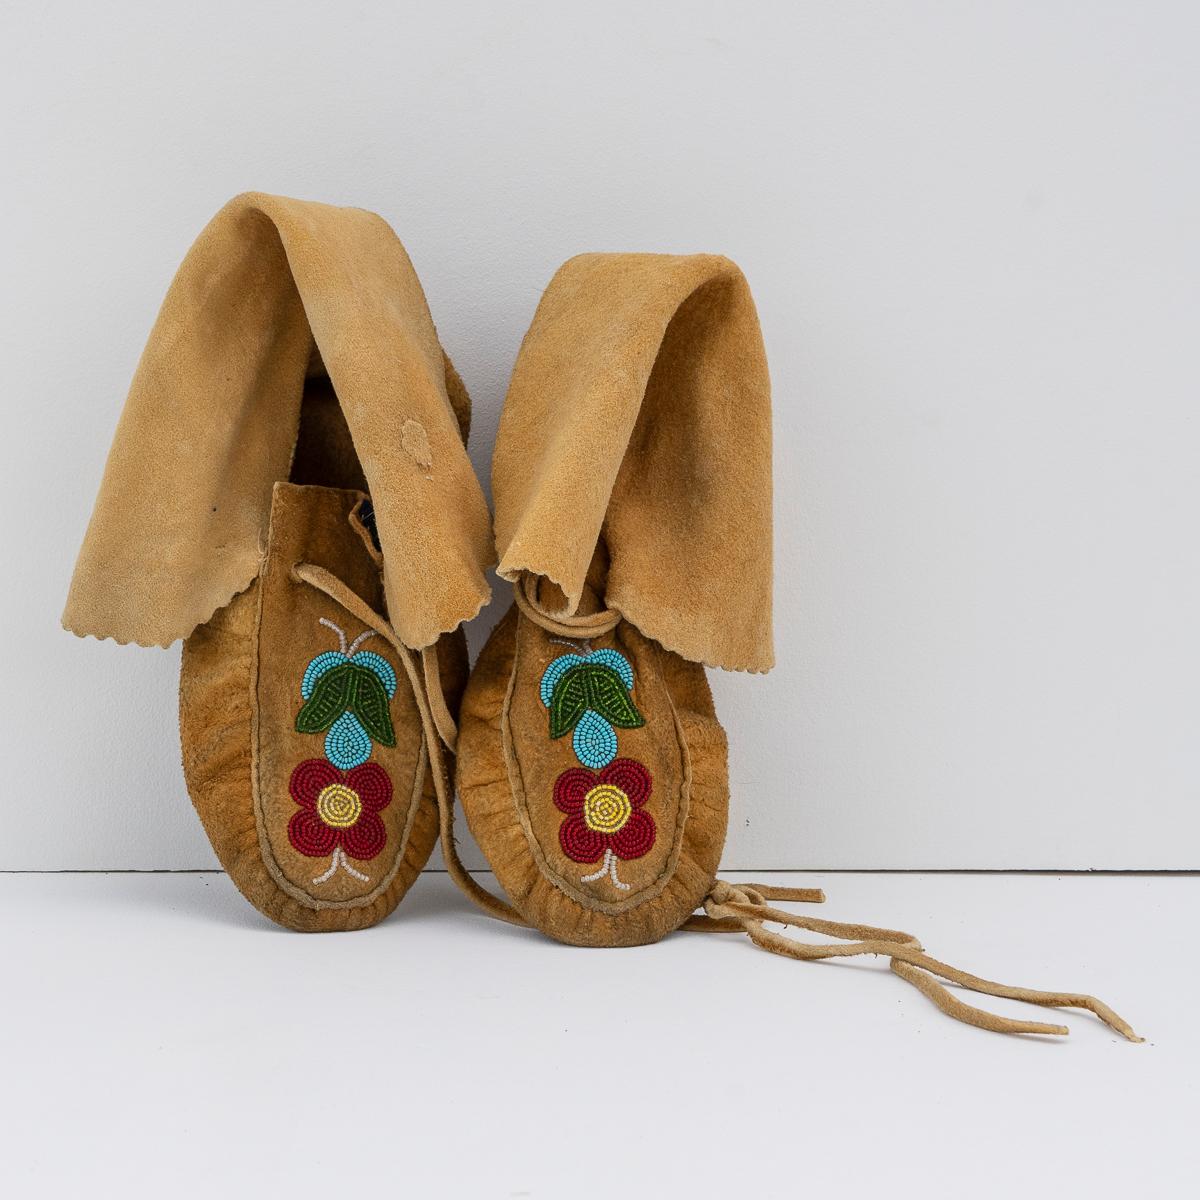 TRADITIONAL OJIBWAY TRIBAL SHOES WITH FLORAL BEAD DETAILING
Originating from the Ojibwe (Ojibwa) people from what is currently Southern Canada and the North Mid-Western United States.

Handmade from smoked moose leather with ankle straps which